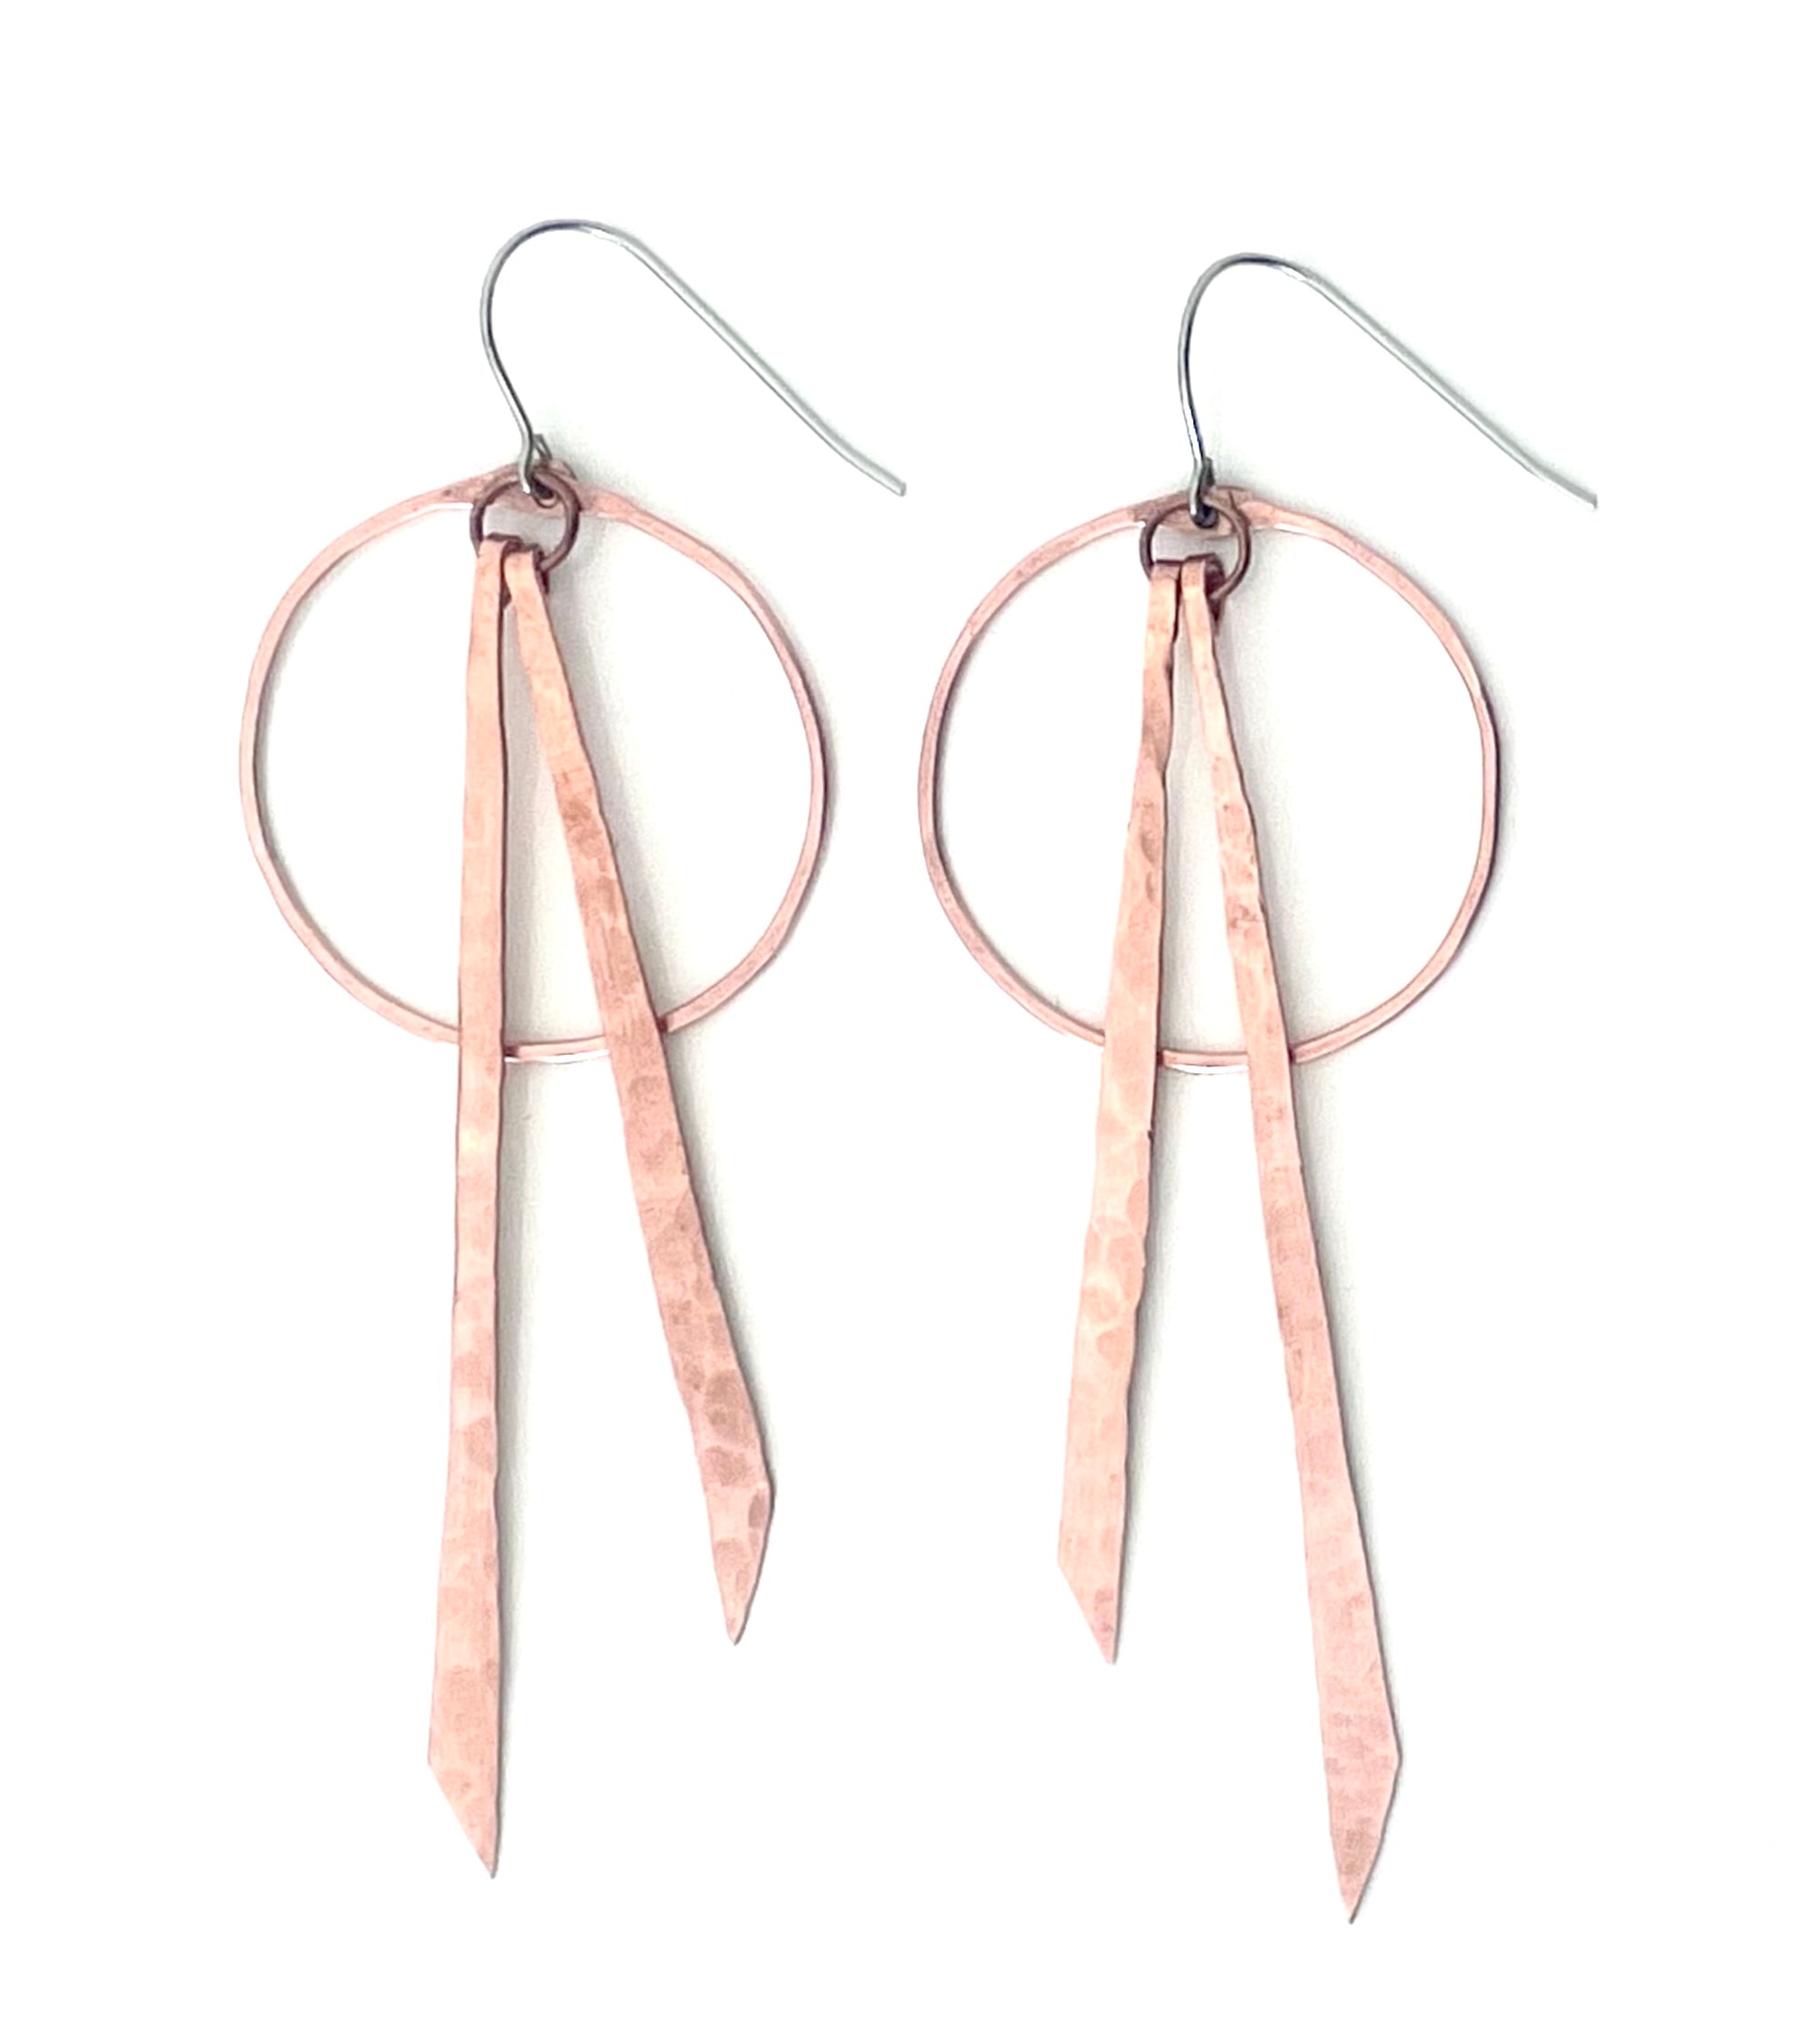 Circle and Slender Triangle Earrings